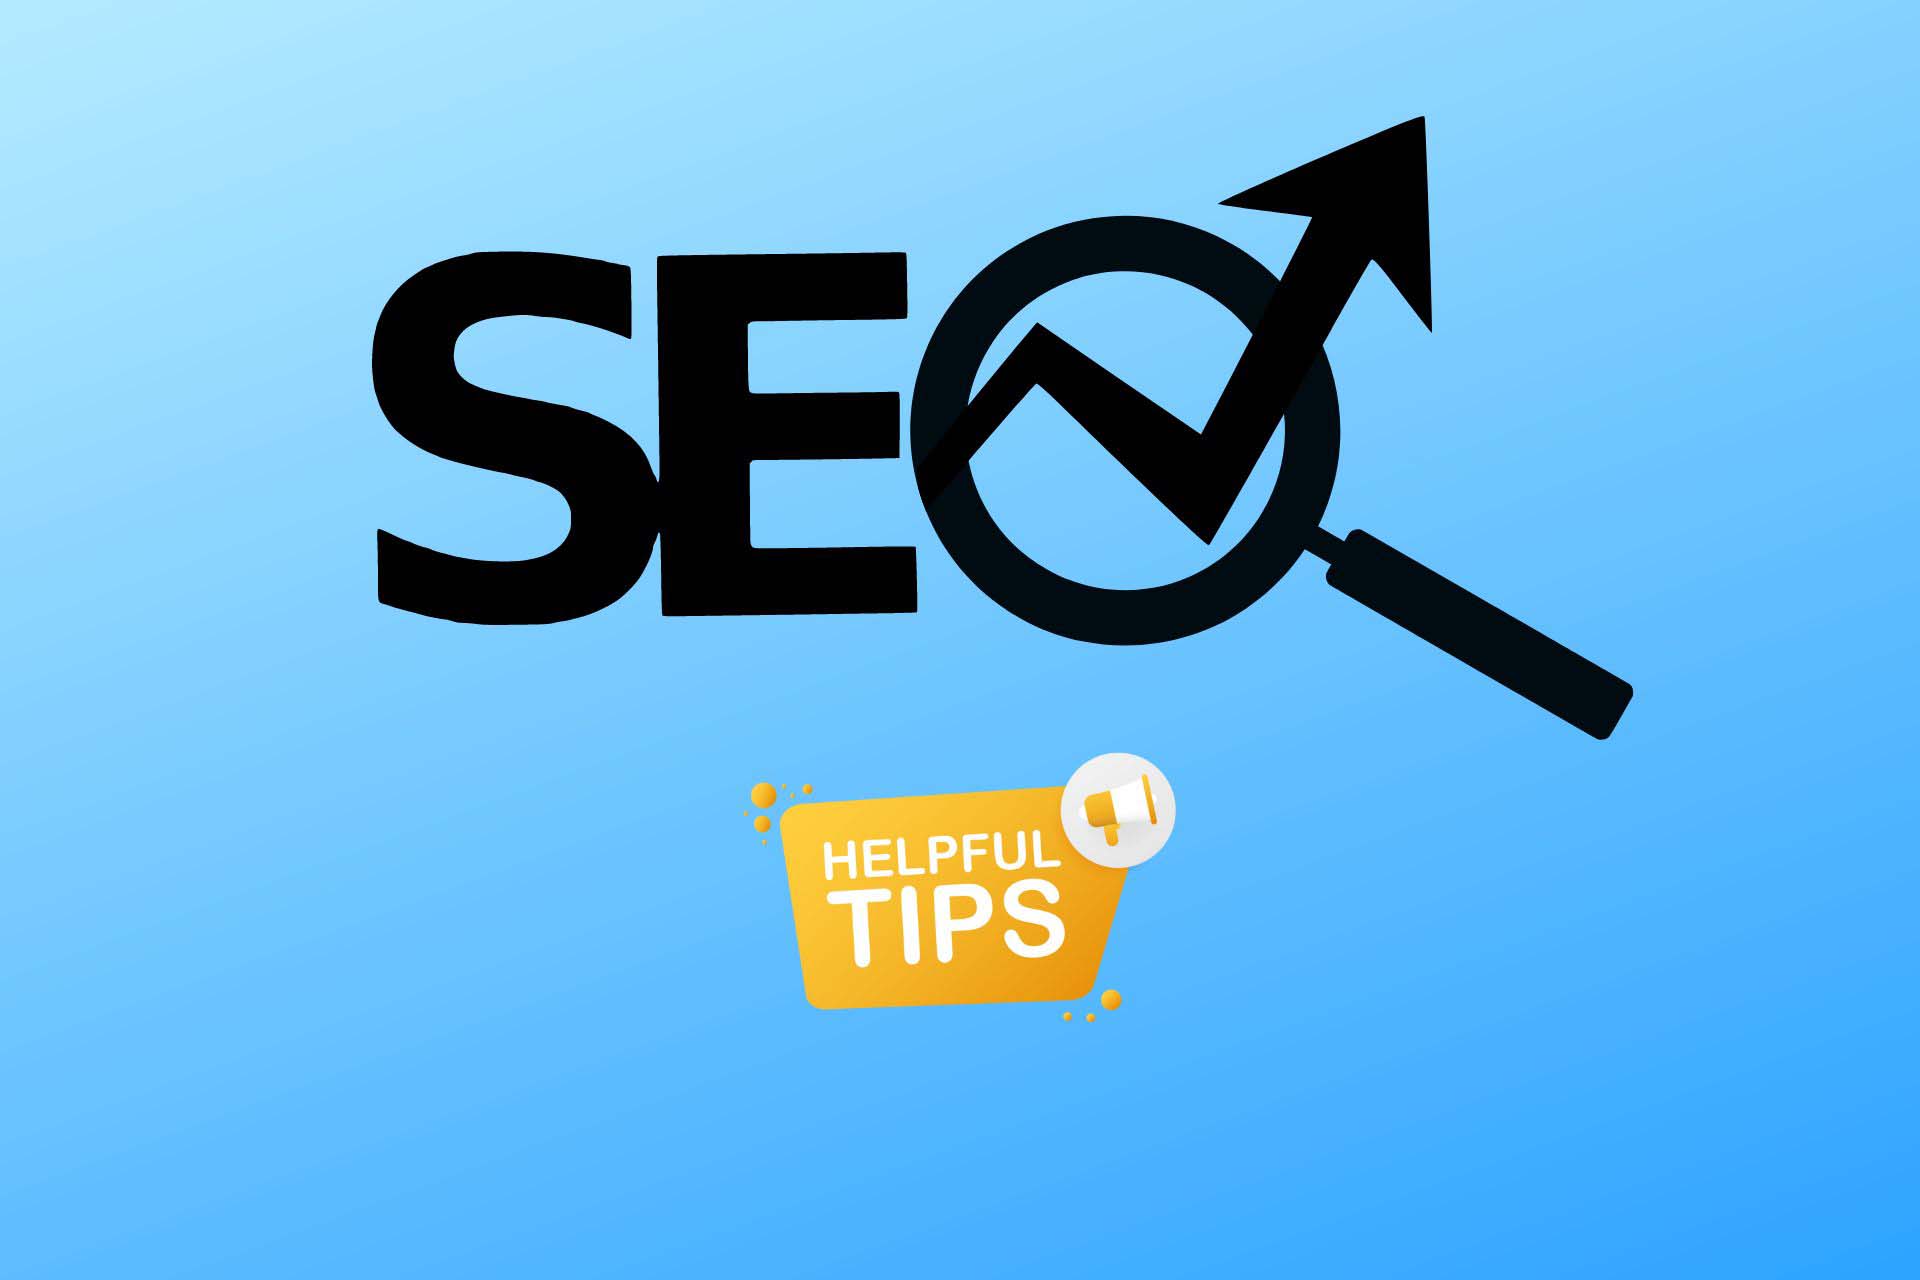 Seo Services Goosuggest How Important